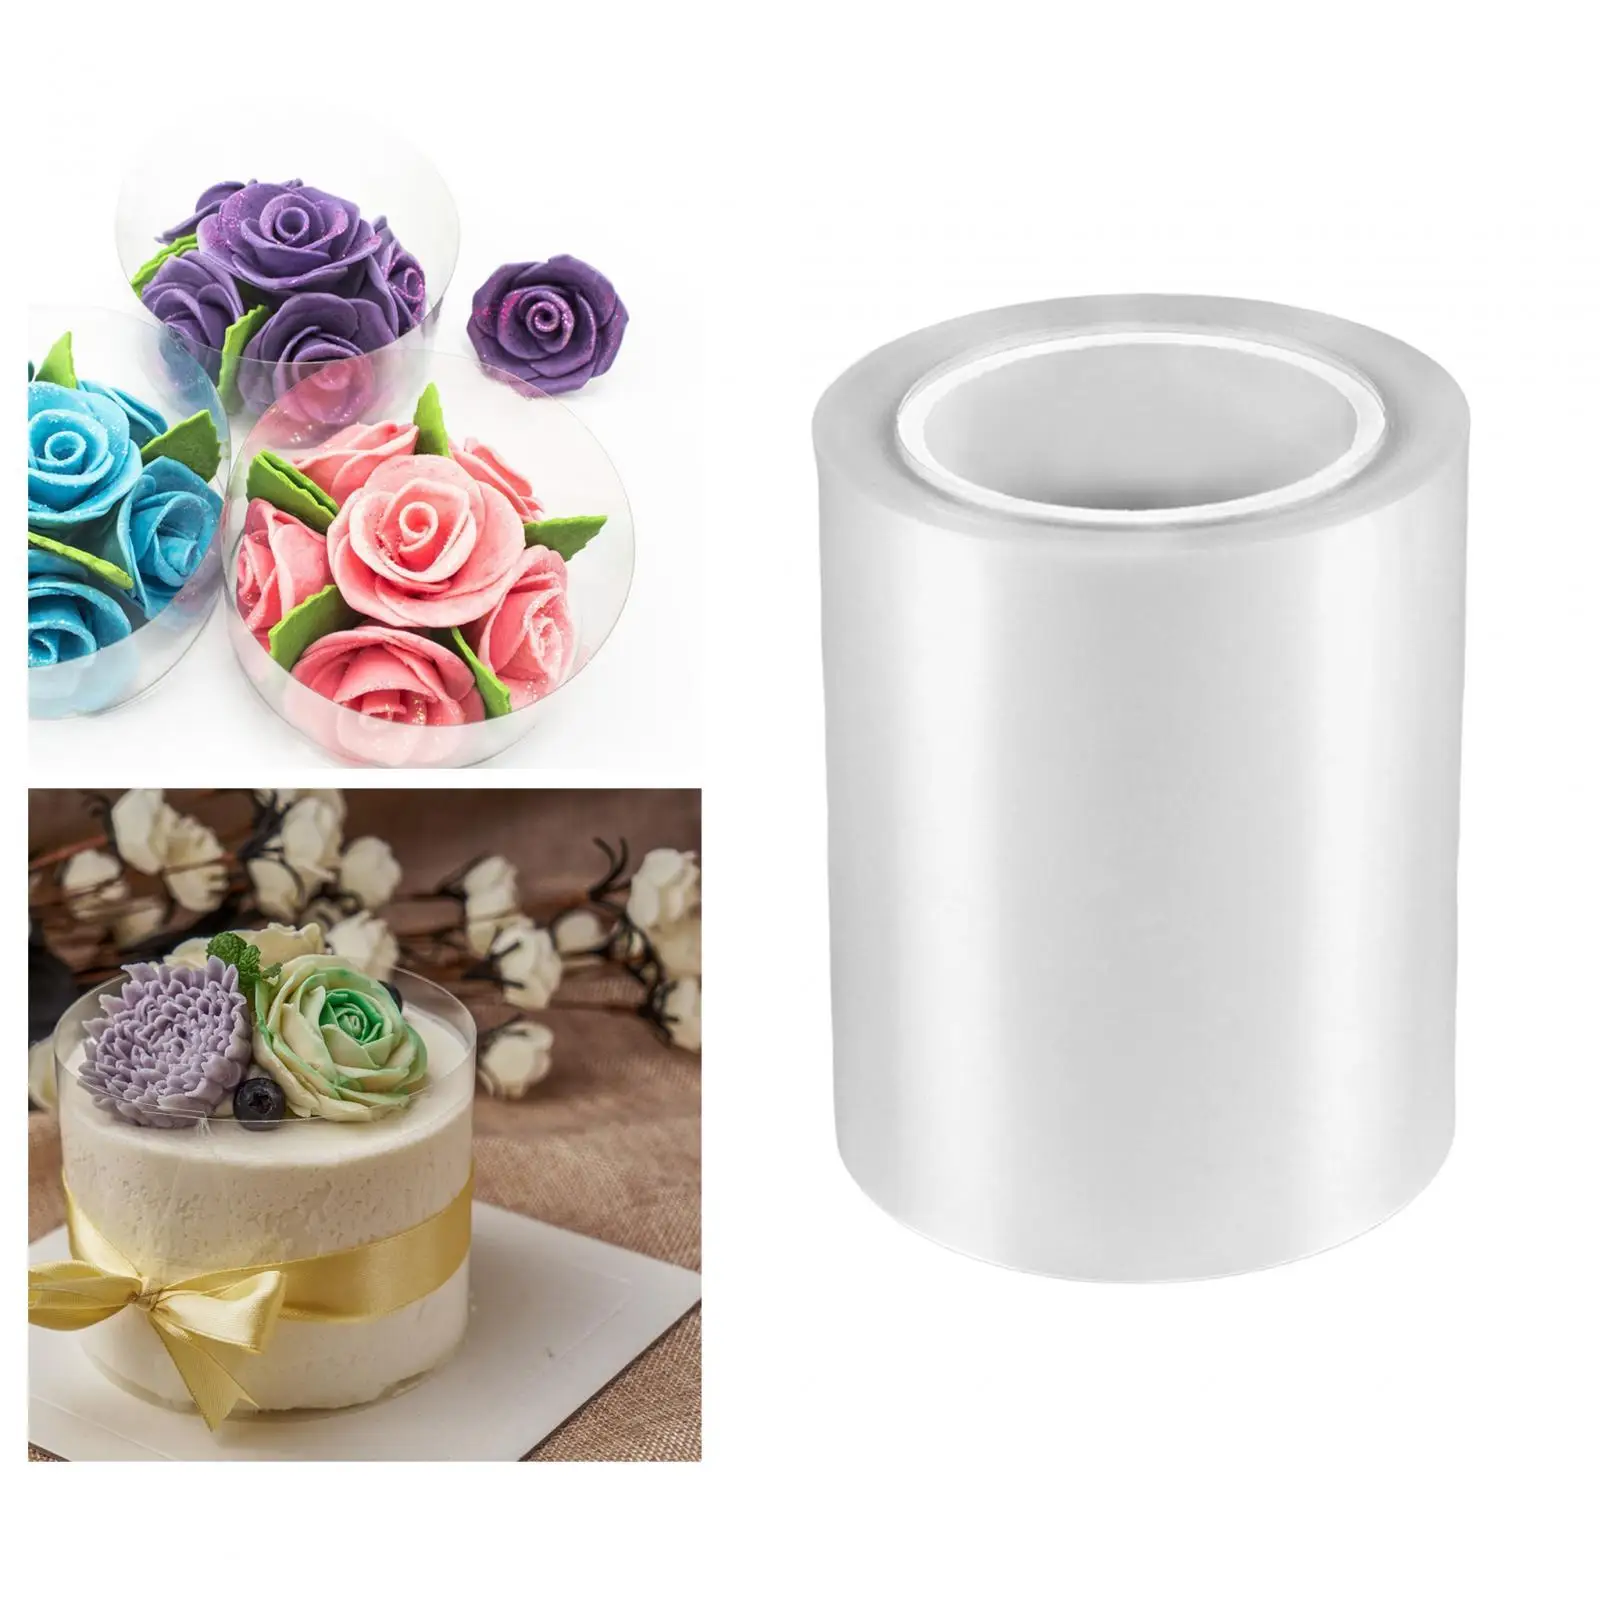 Cake Collars Cake Decorating Easy Remove Chocolate Candy Edge Roll Mousse Cake Surrounding Edge for Cake Decoration Cake Maker